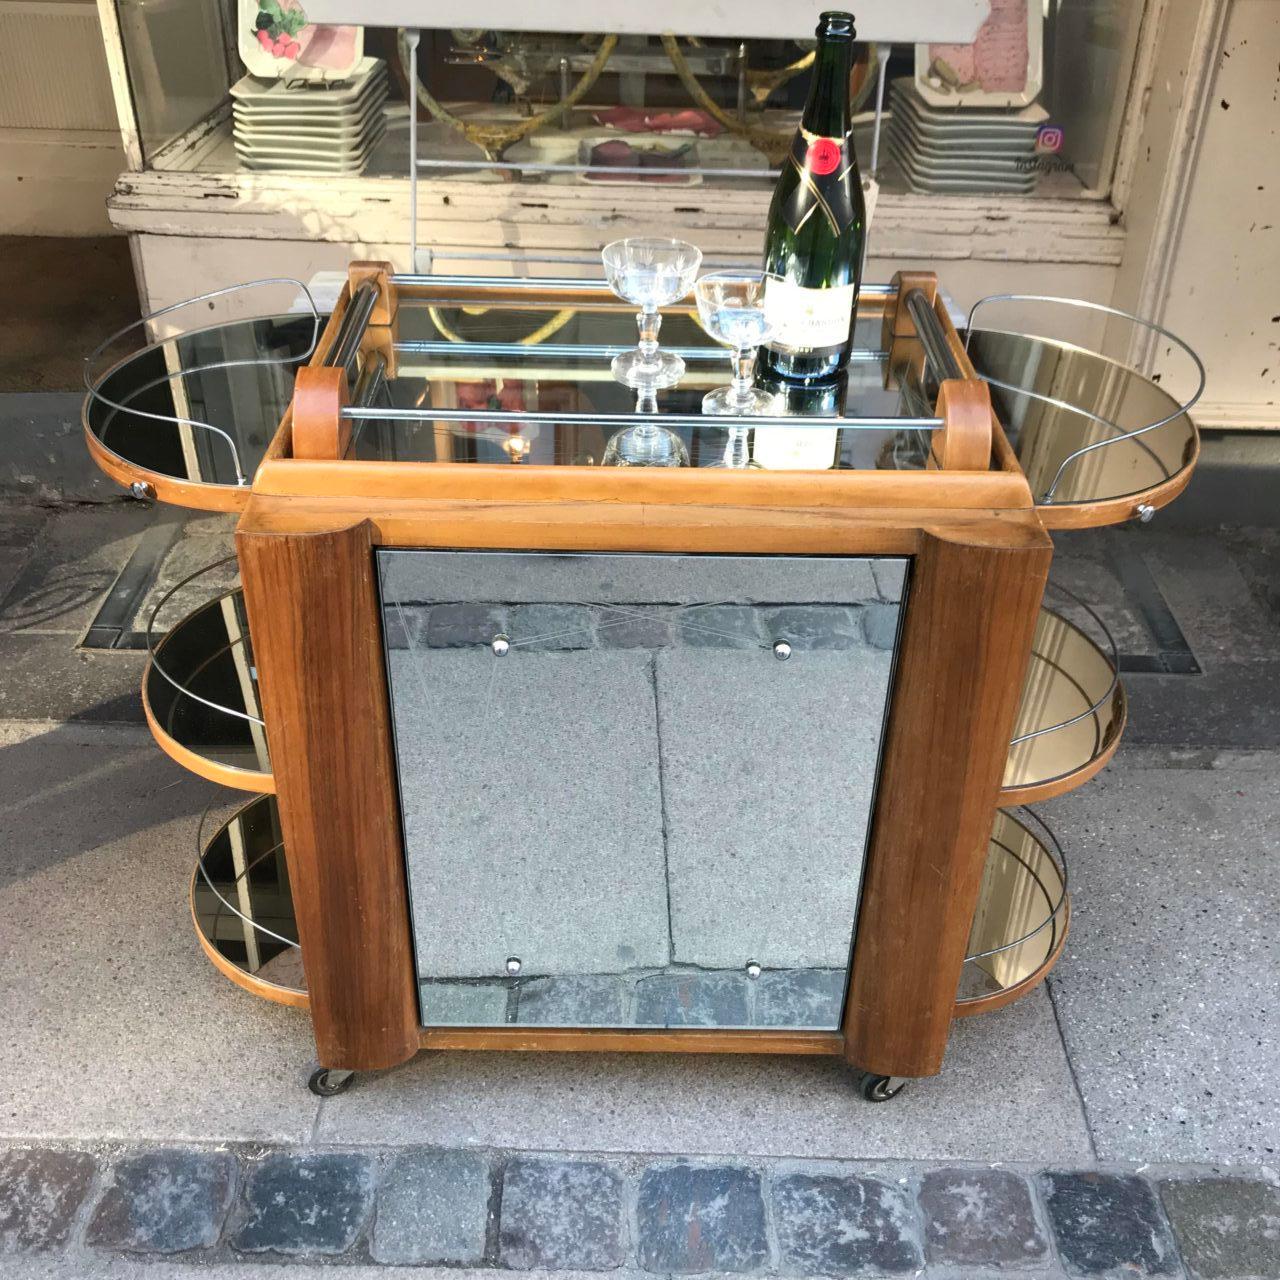 This wonderful French bar / drinks cart displays all the hallmark elements of the Classic cross Atlantic “ocean liner” Art Deco design of the 1930s. The rounded ends, with the polished chrome railings, draw parrallels with a ships deck. The etched